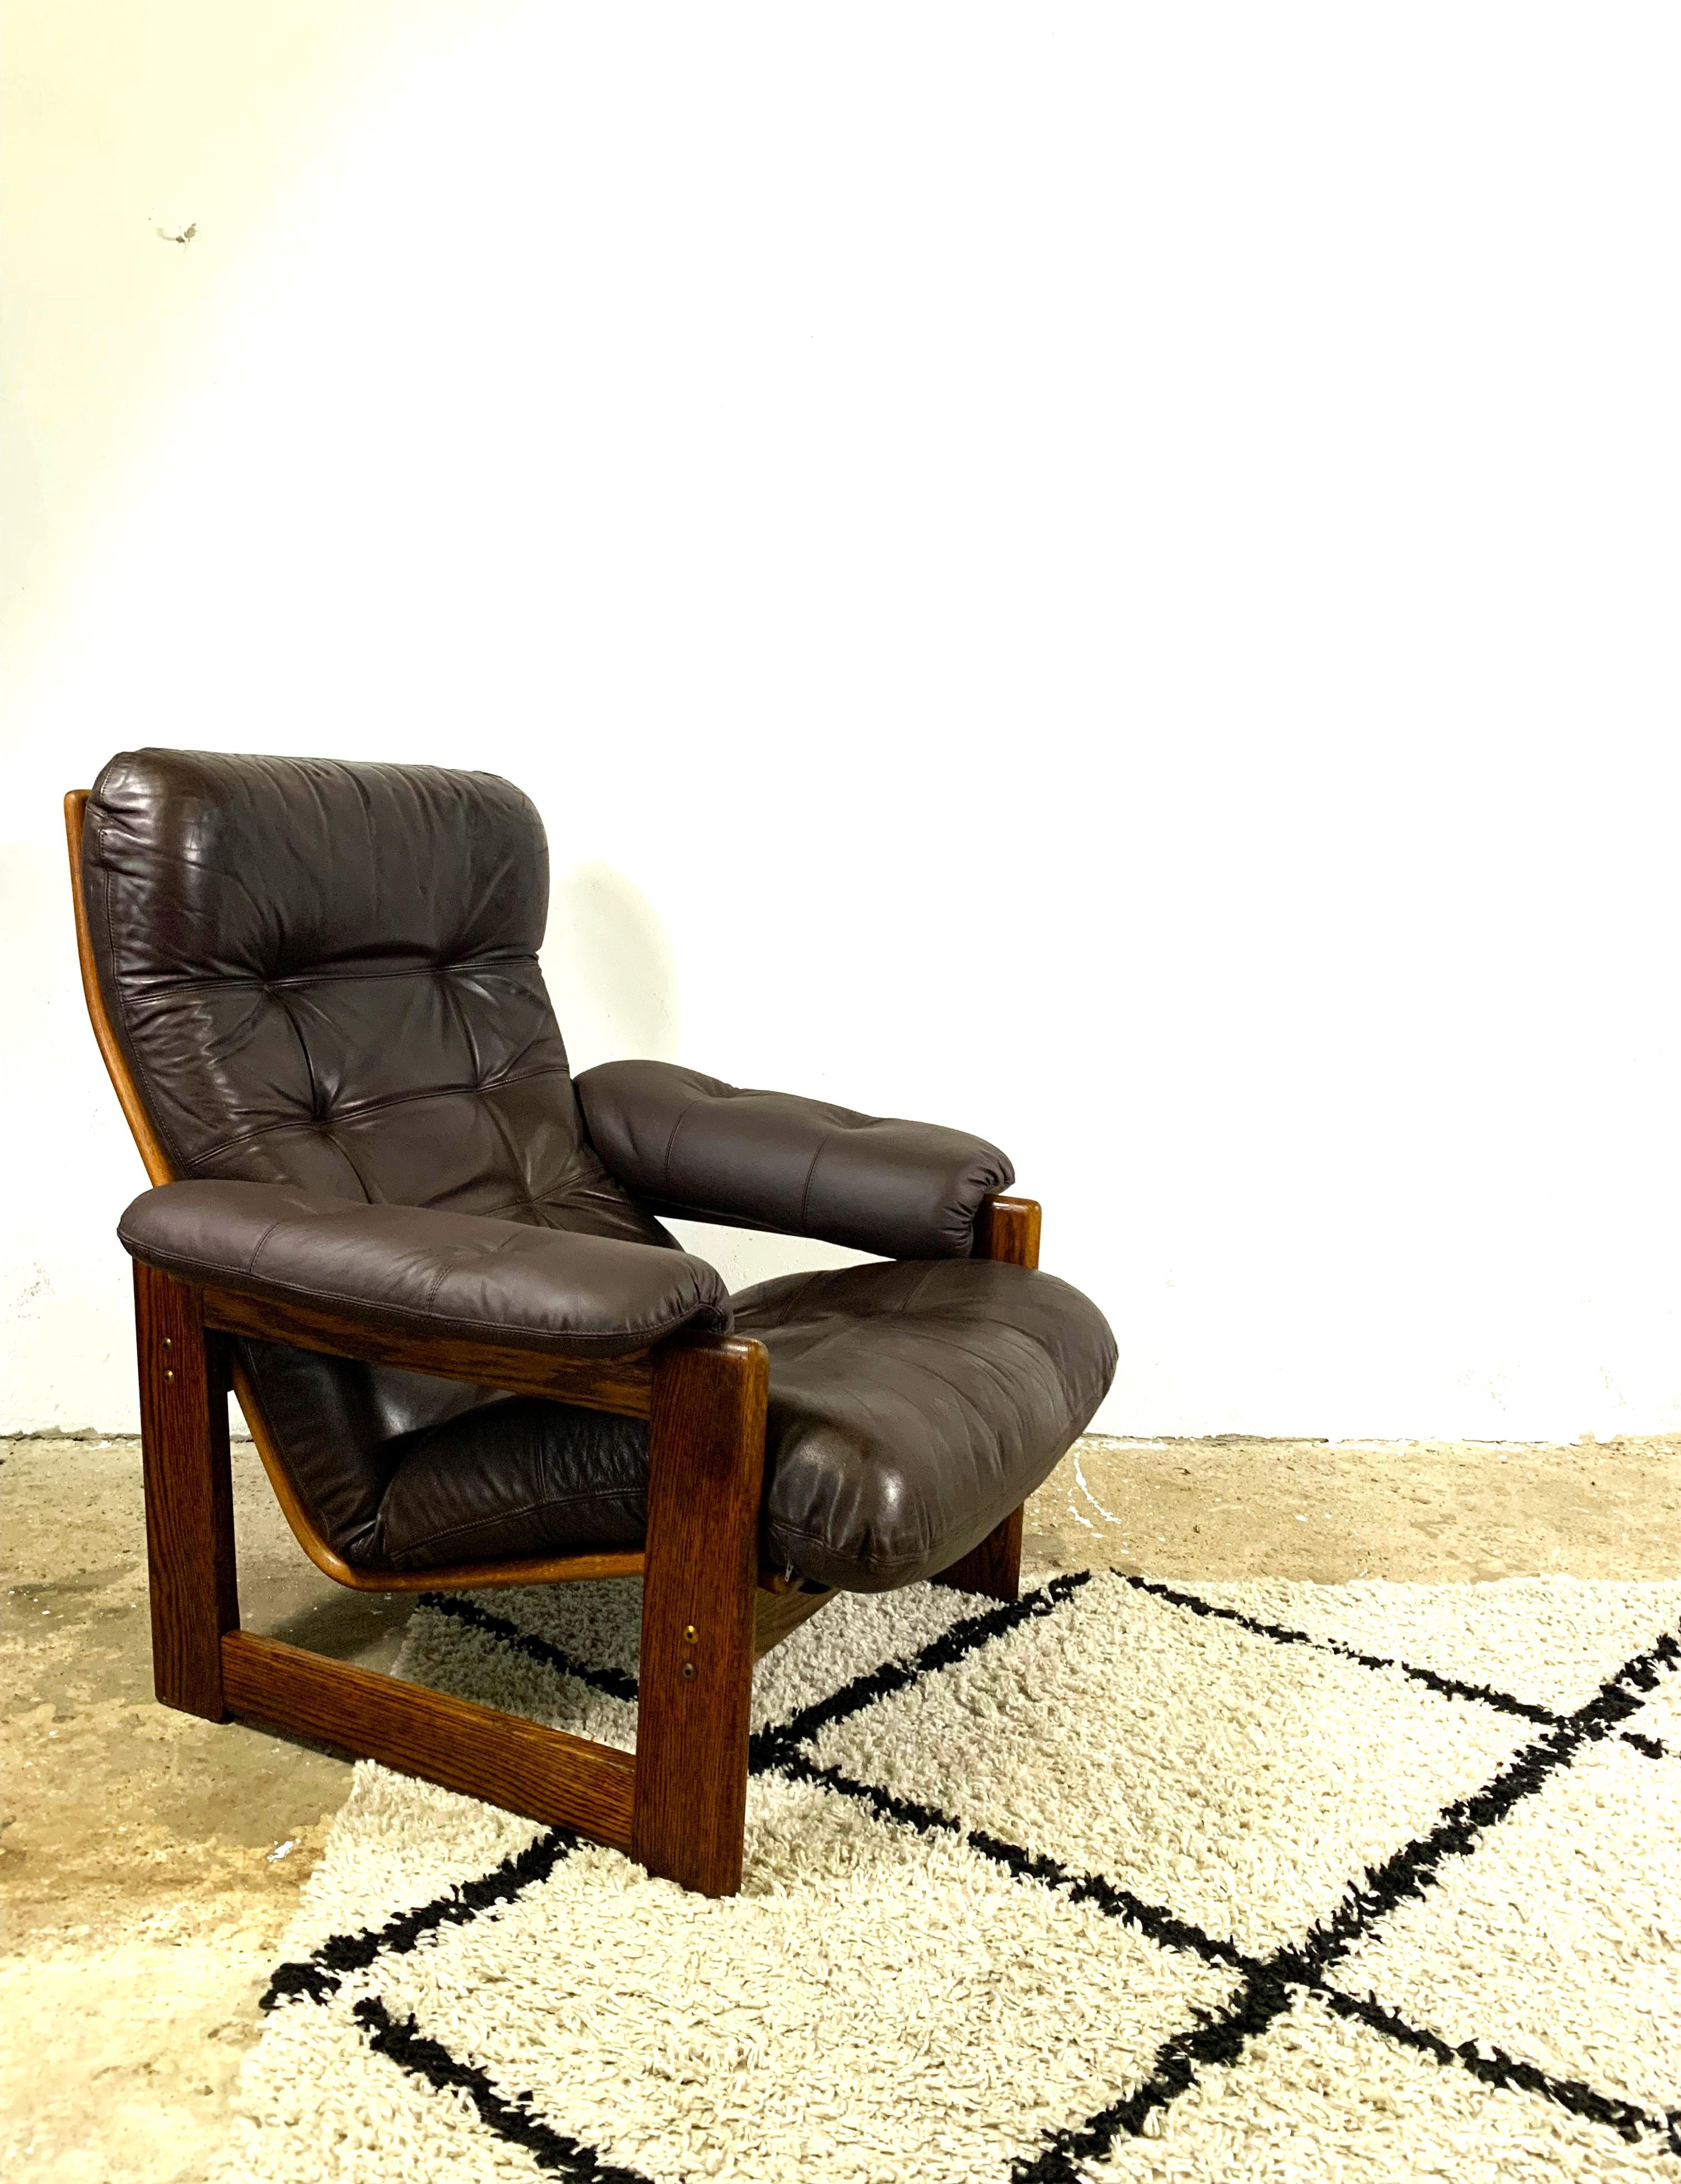 Leather wenge armchair made by Dutch Coja furniture makers, stunning chair, lovely organic shape, leather has lovely patina. Armrest parts are reupholstered with similar leather. Very comfortable. Stylish!